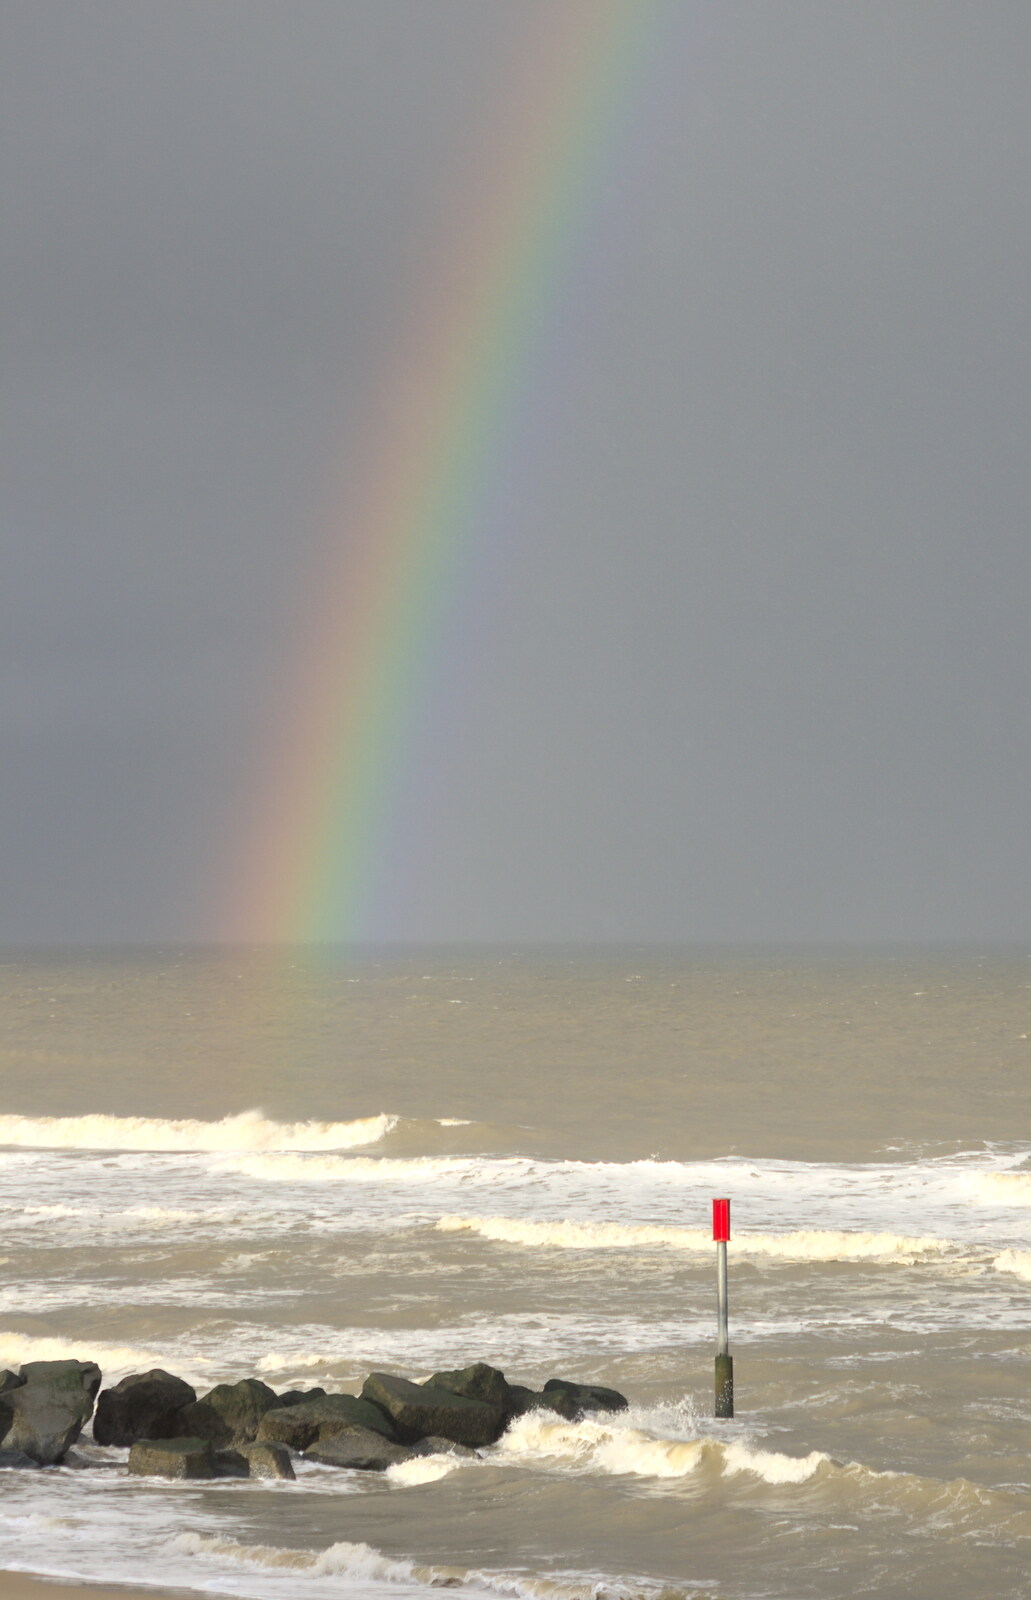 A rainbow over a groyne from Horsey Seals and Sea Palling, Norfolk Coast - 2nd January 2017